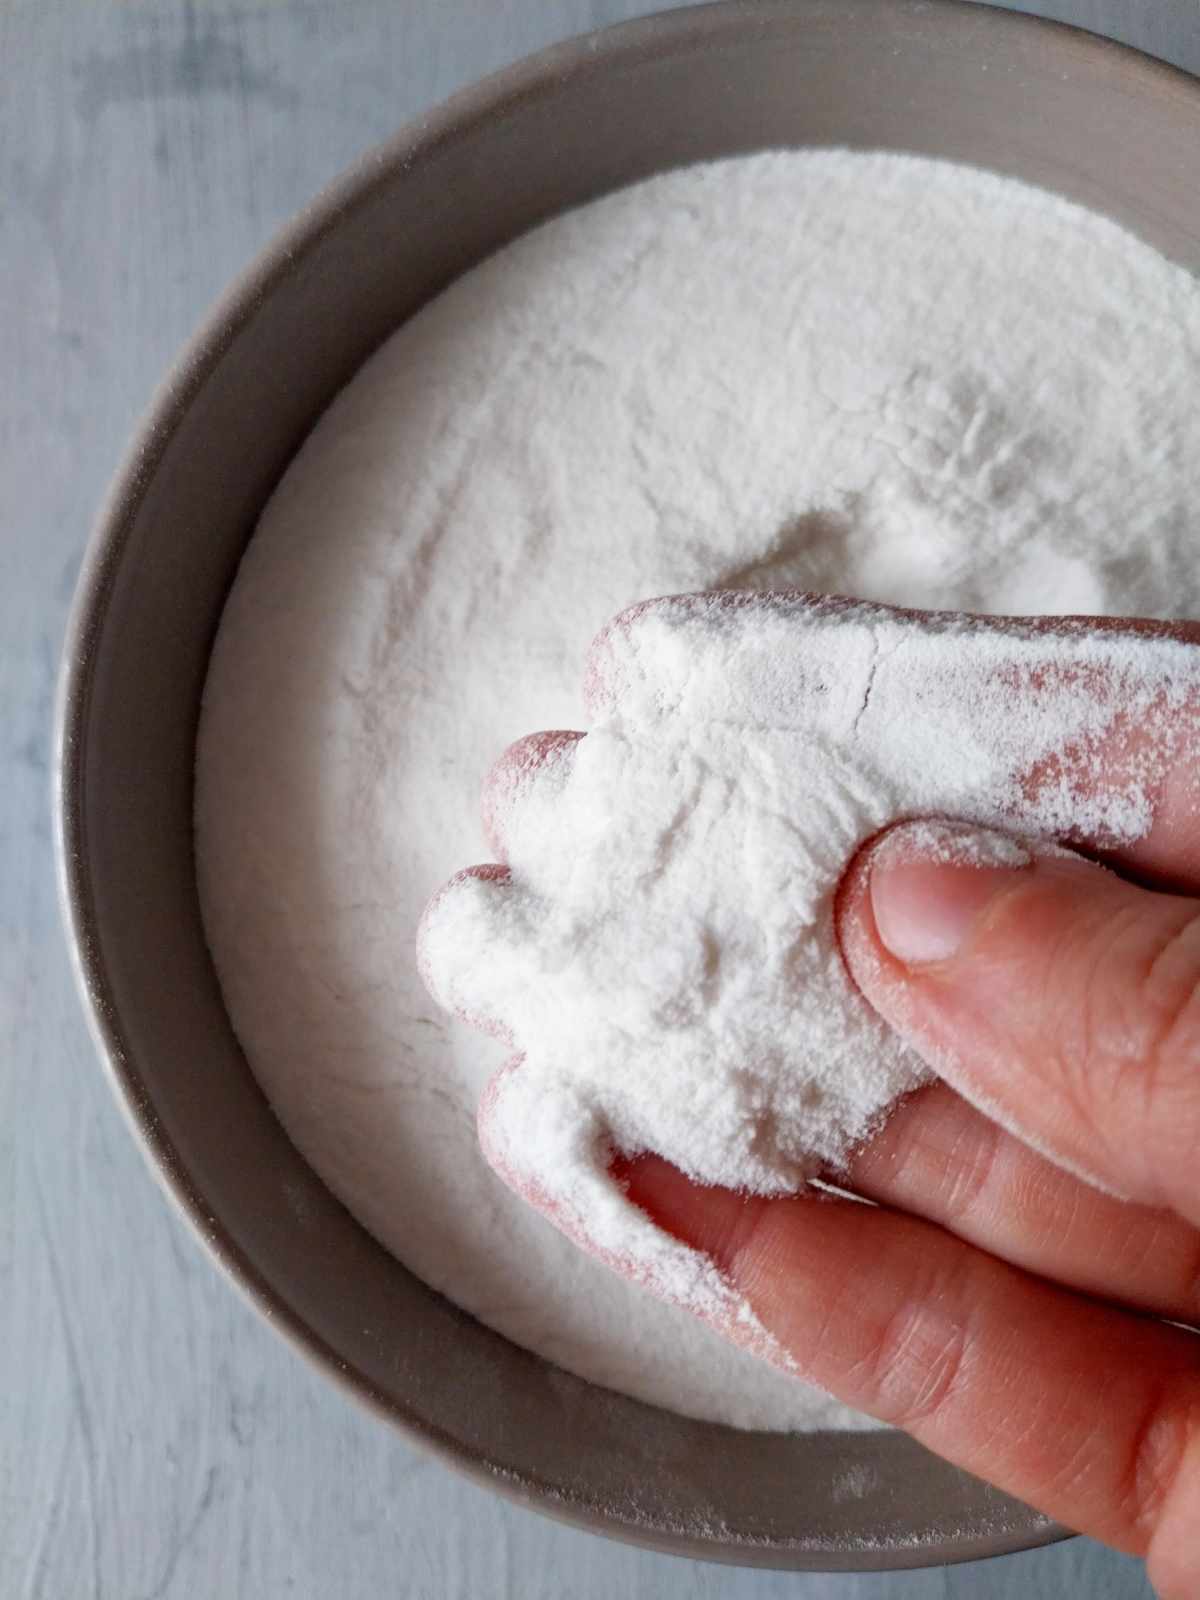 Rice flour held in a hand.